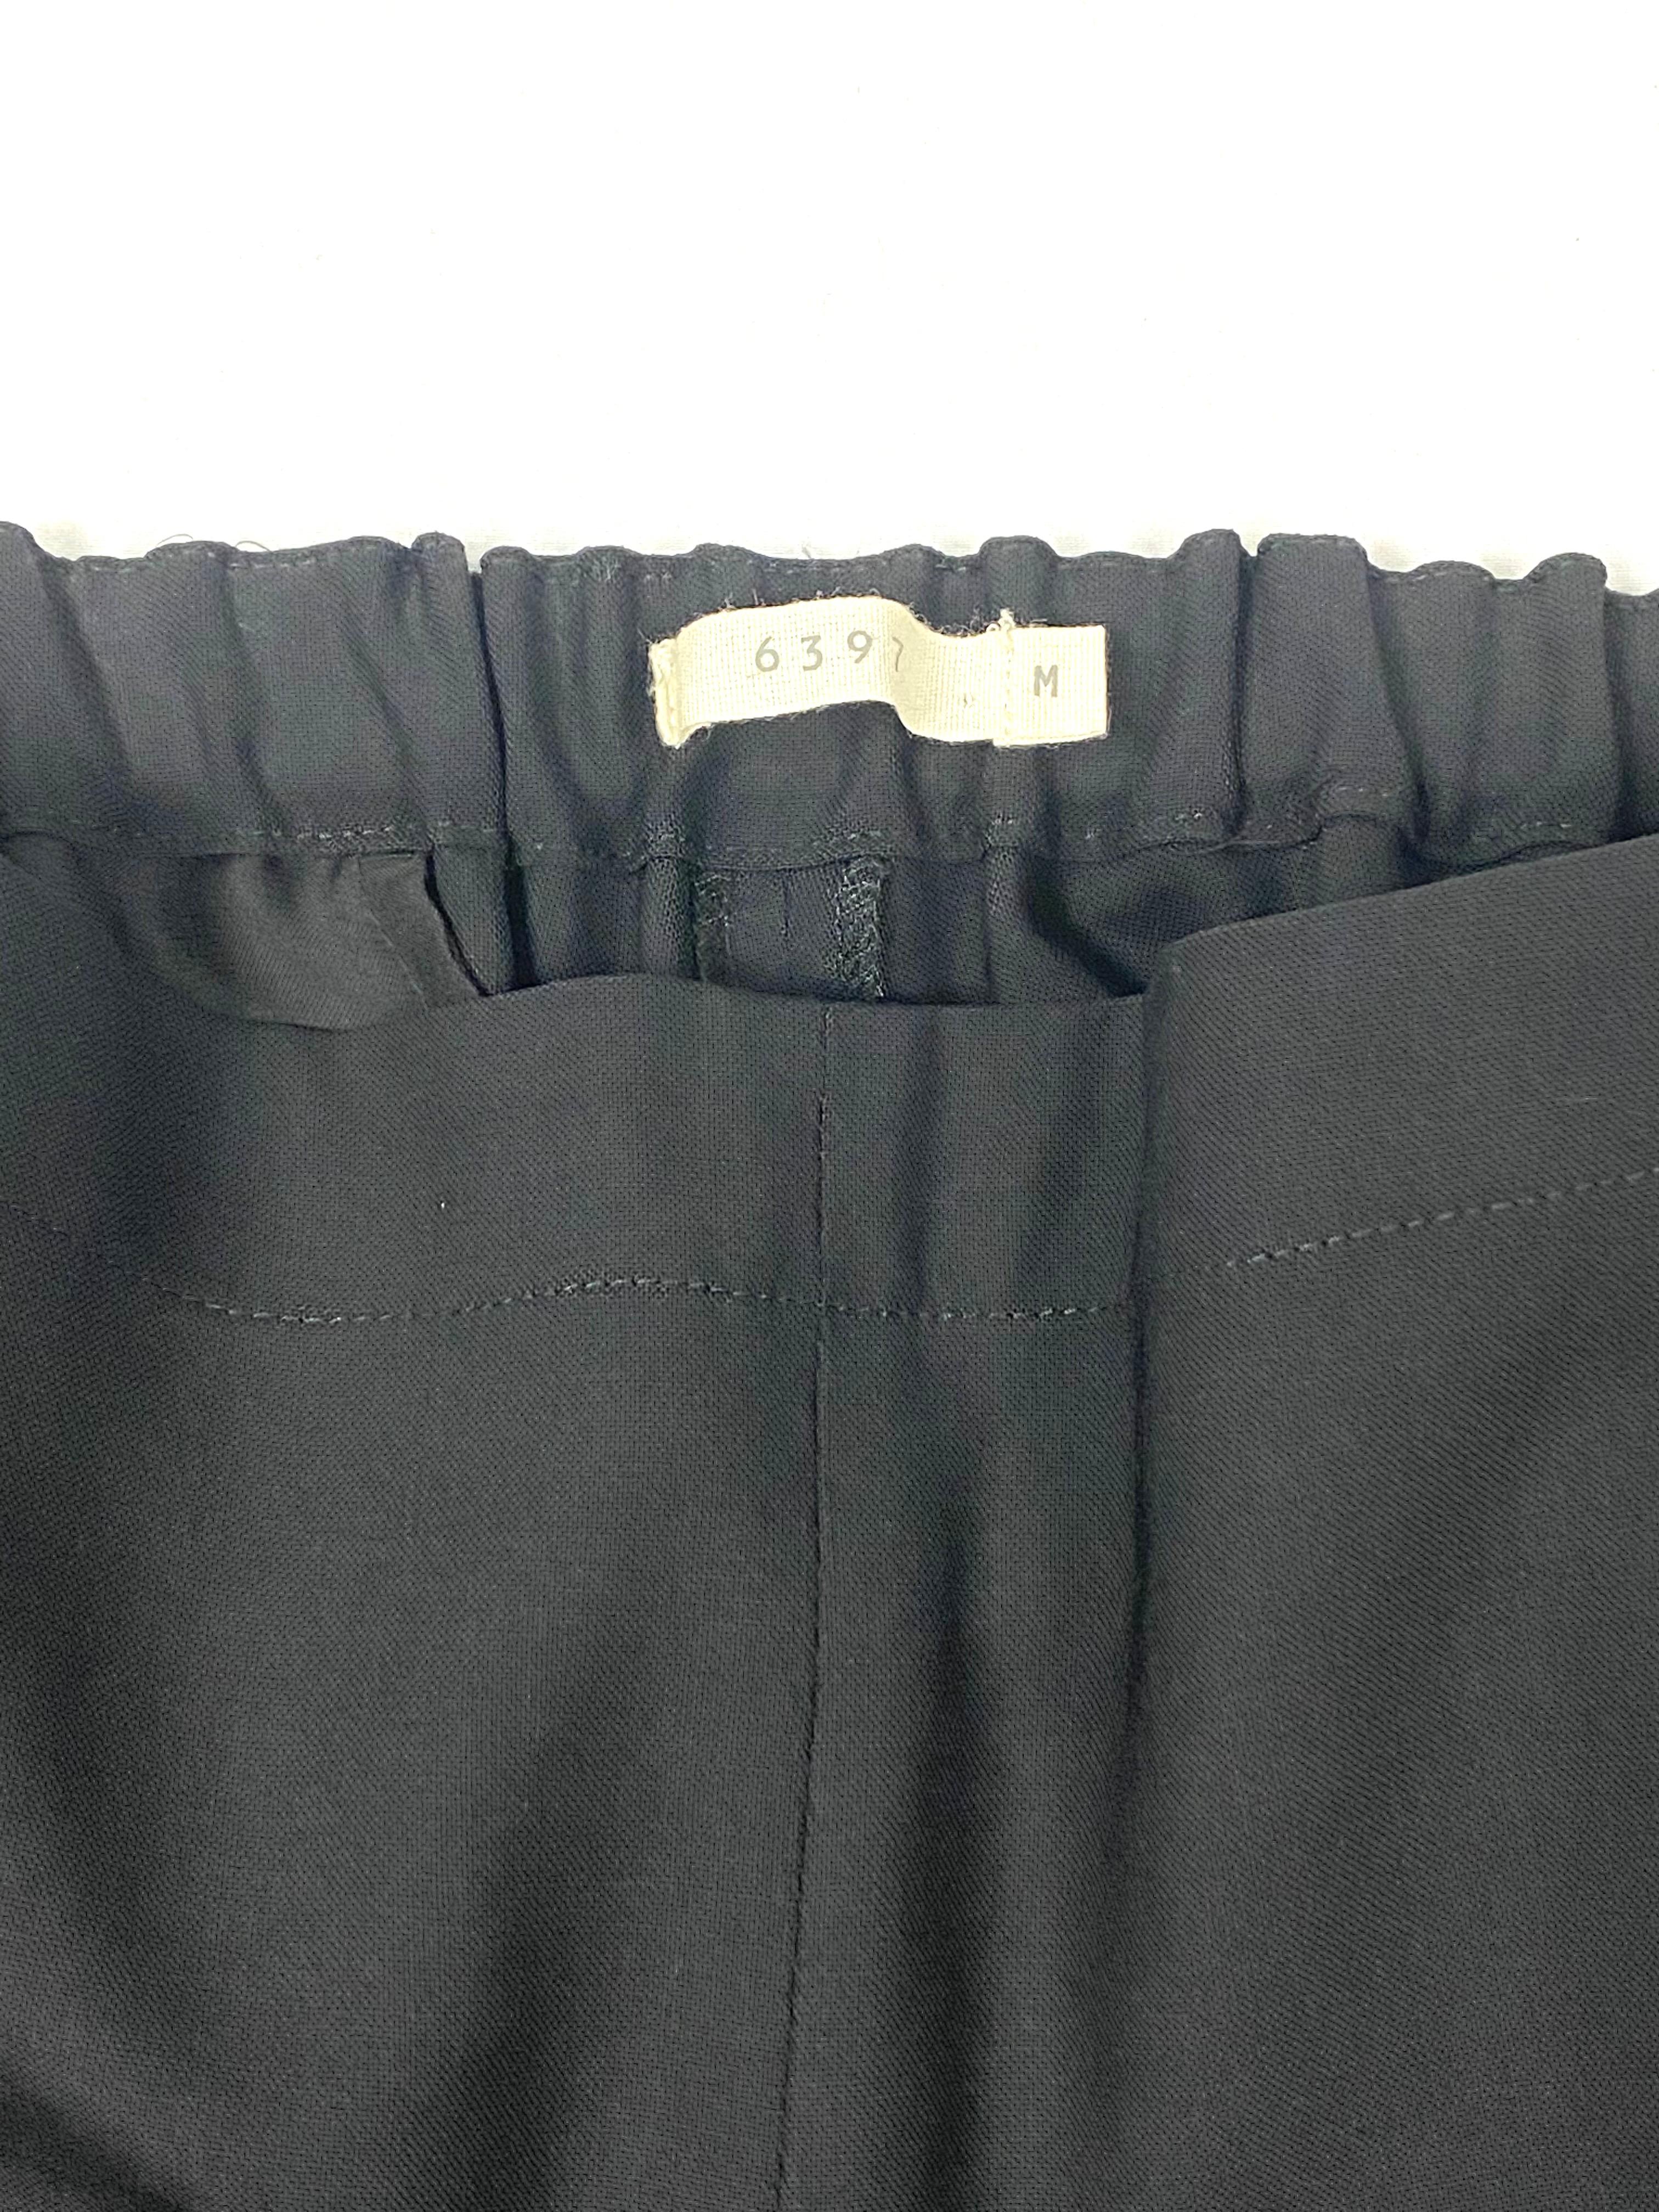 Product details:

The pants are made of 96% wool, it features black color with stretchy elastic on the back of the waist, pockets on the sides and one pocket on the back. Made in USA.